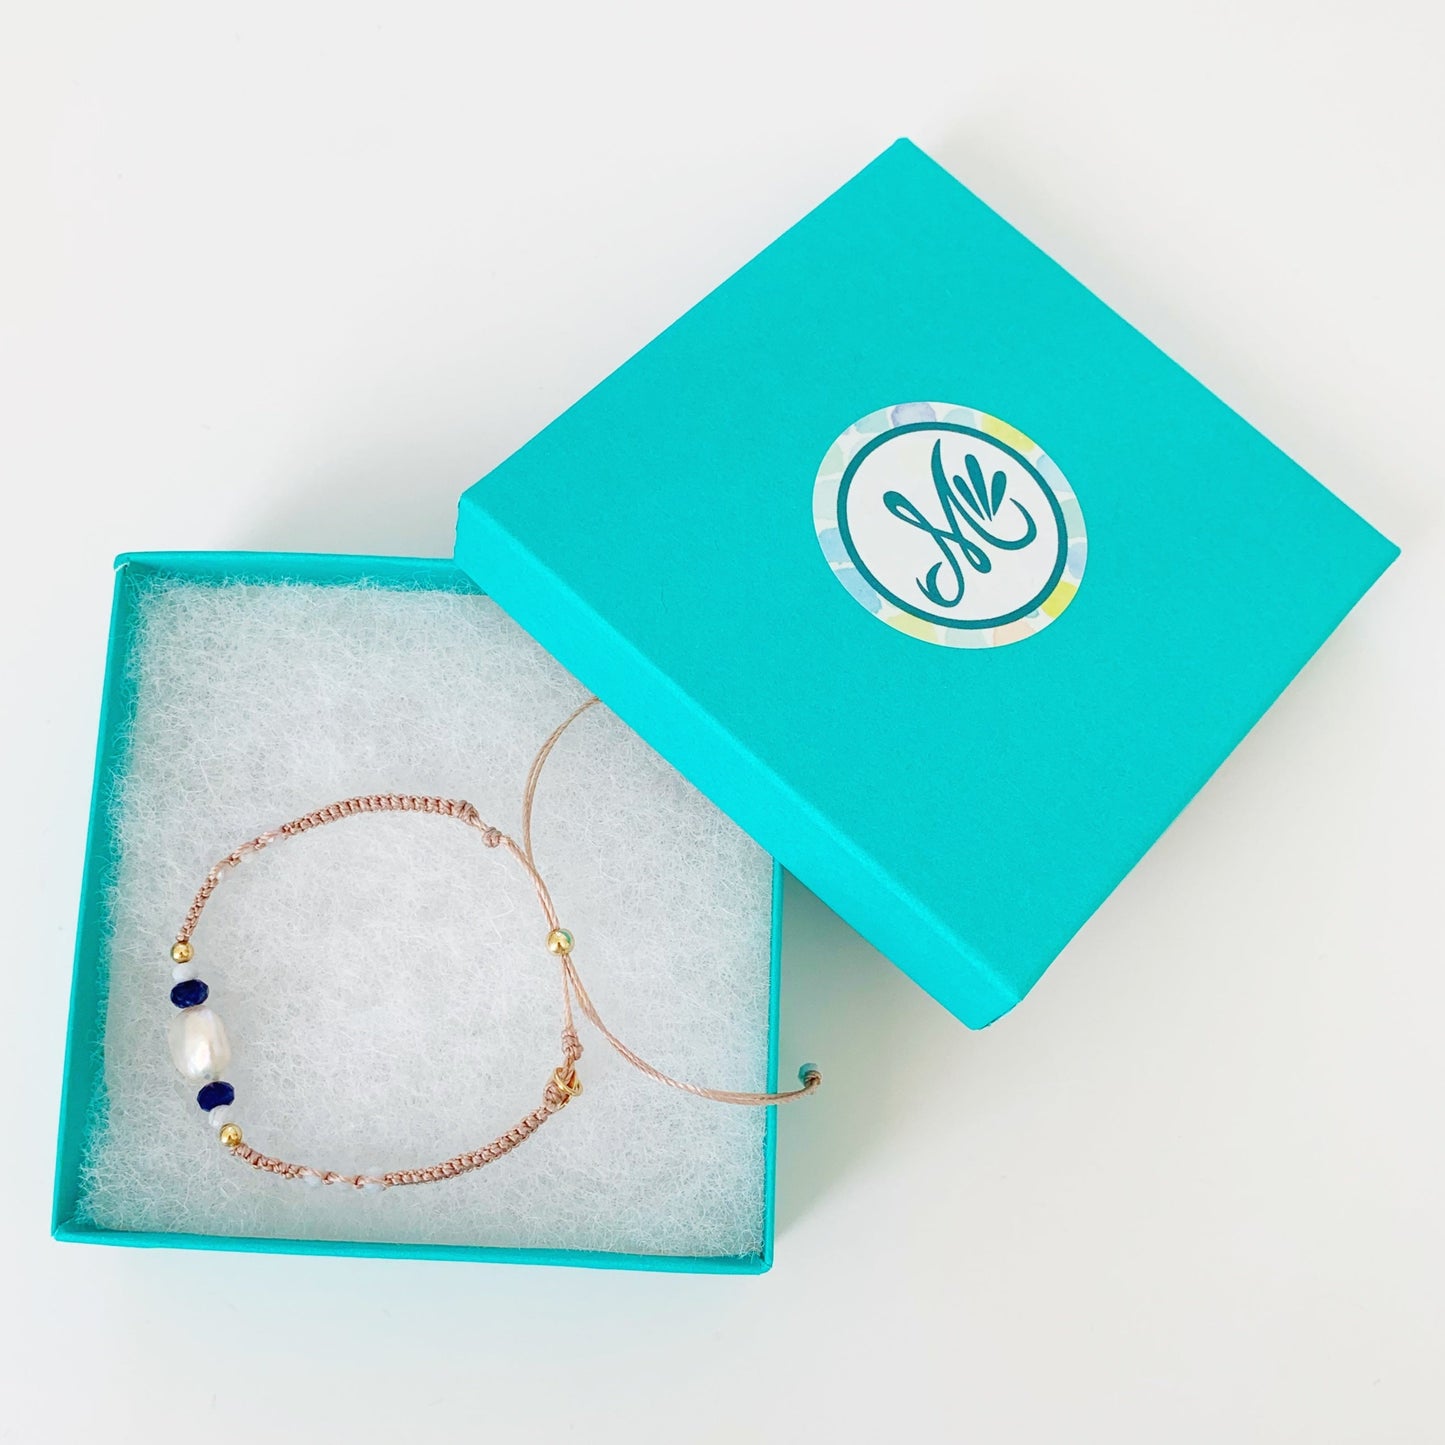 Tan macrame adjustable friendship bracelet pictured in a teal mermaids and madeleines gift box photographed on a white surface